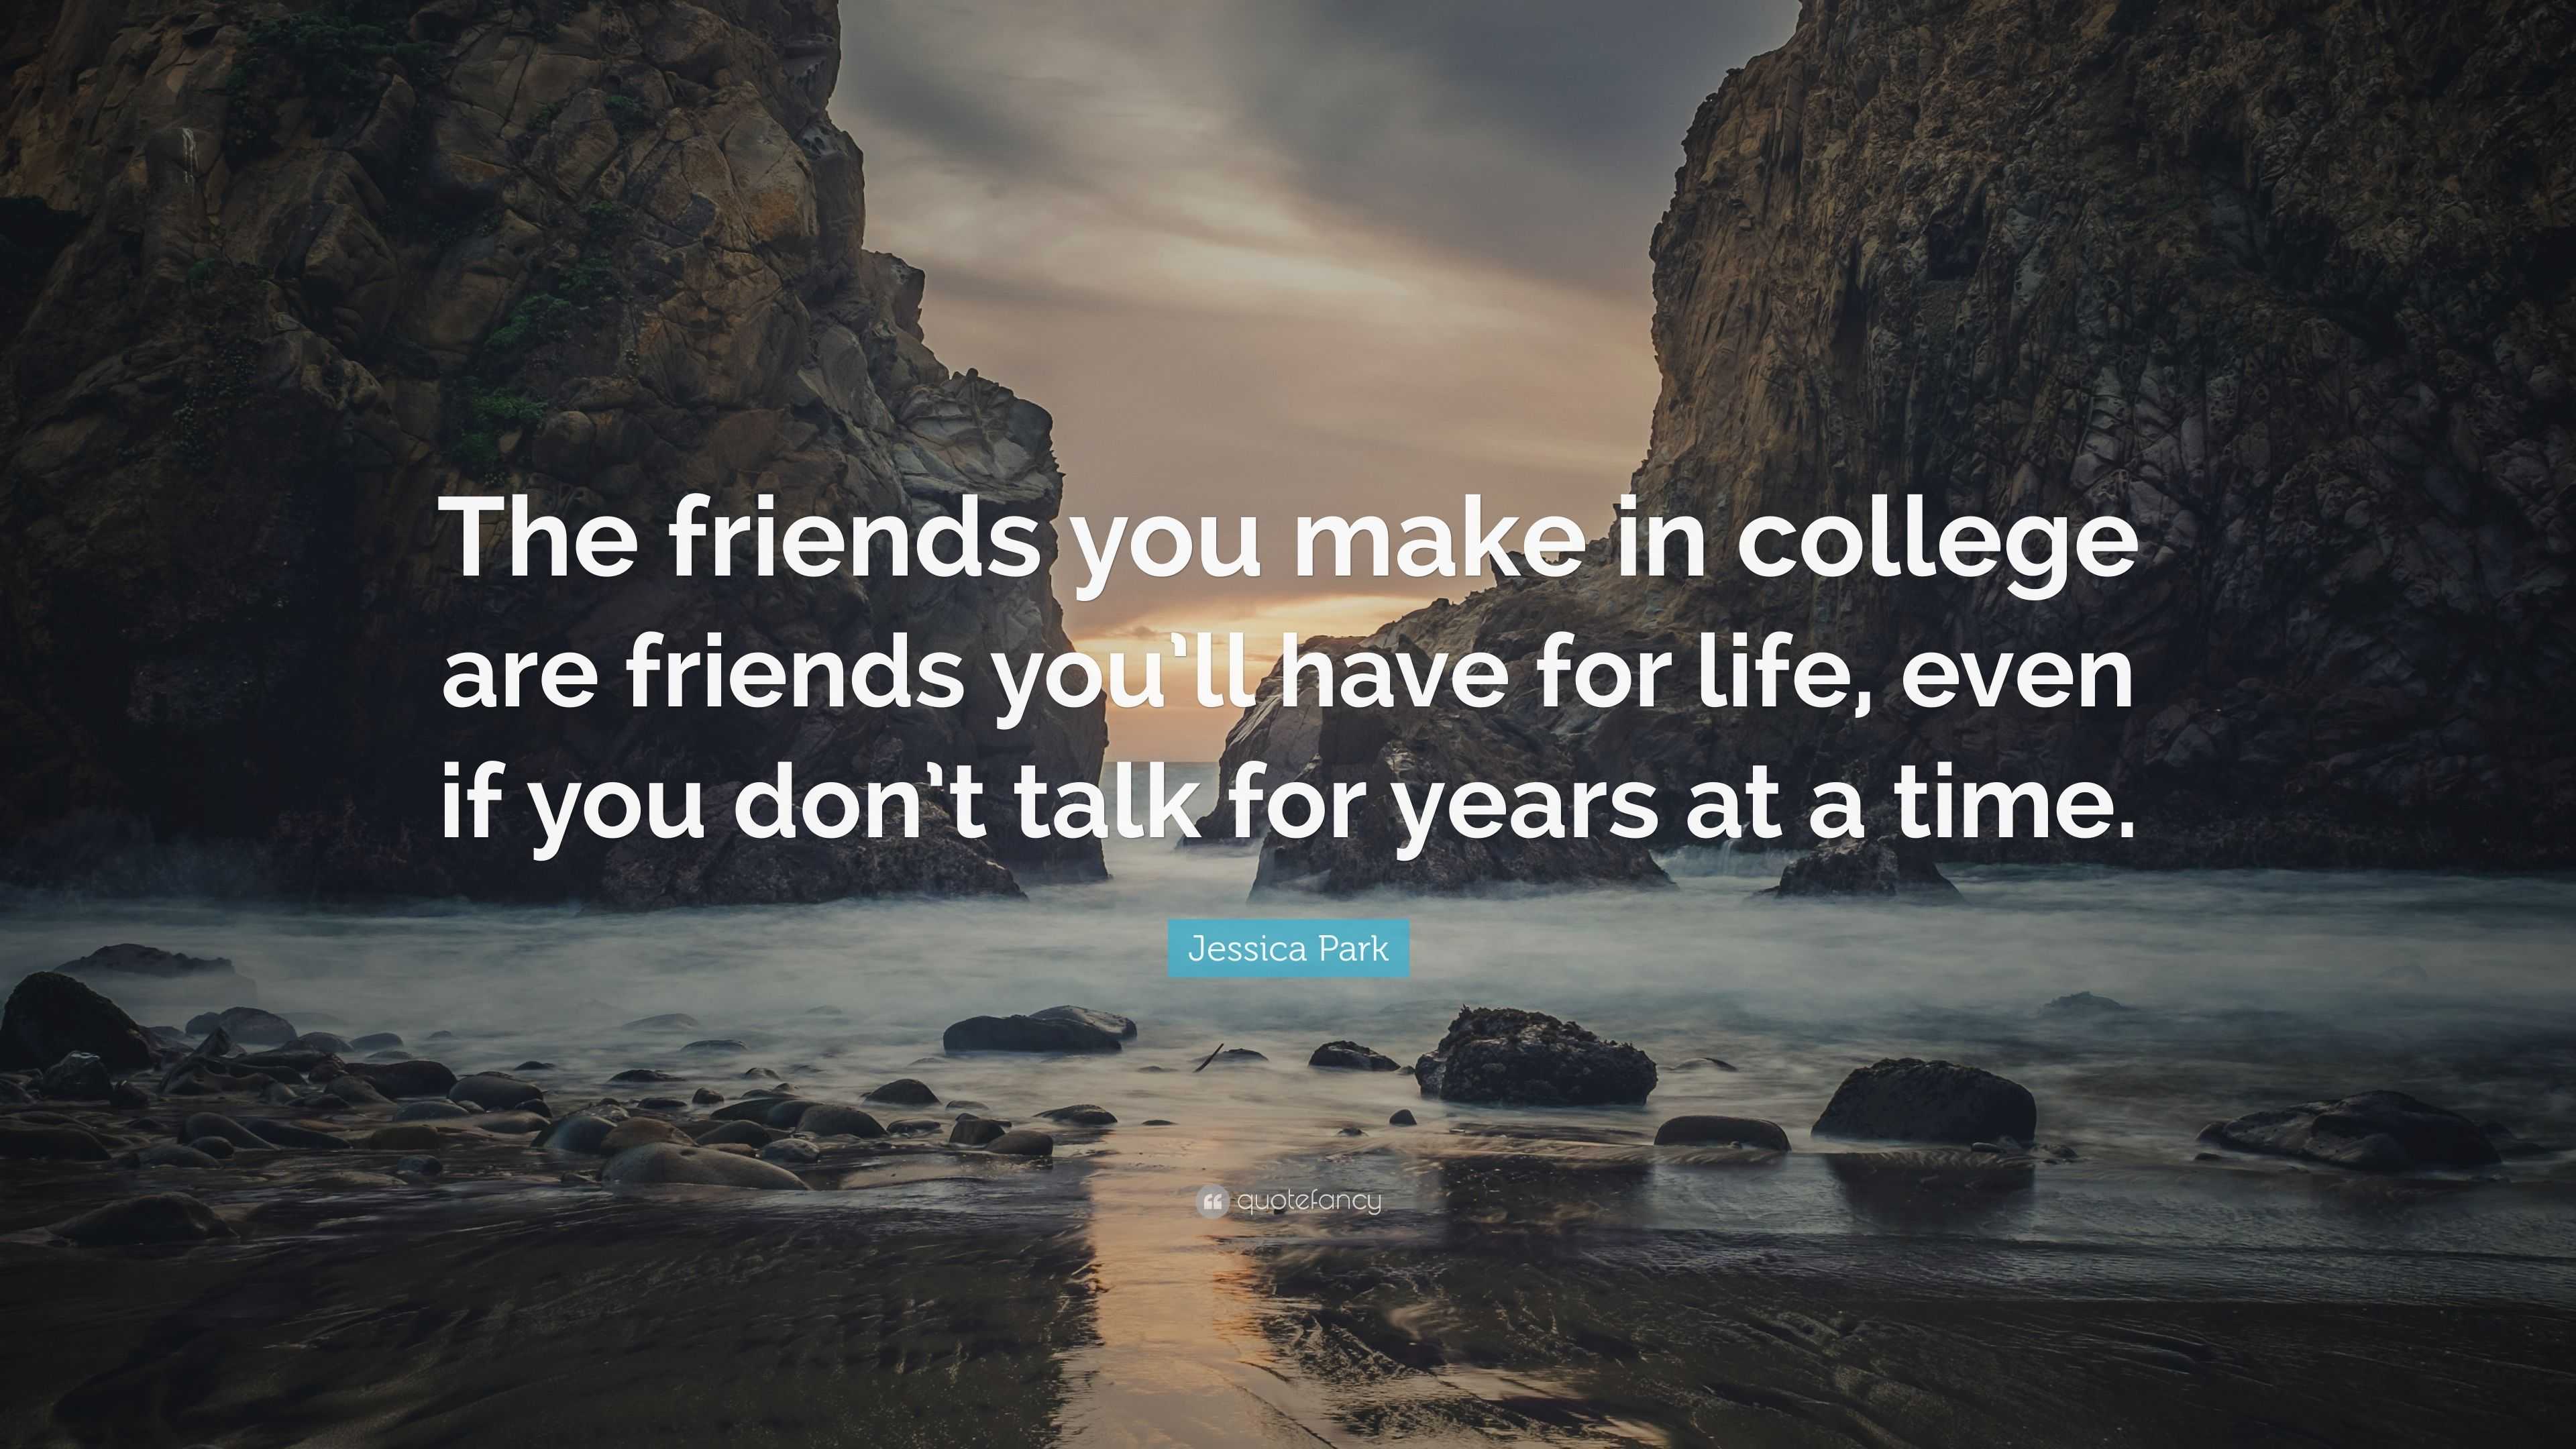 Quotes about college friends